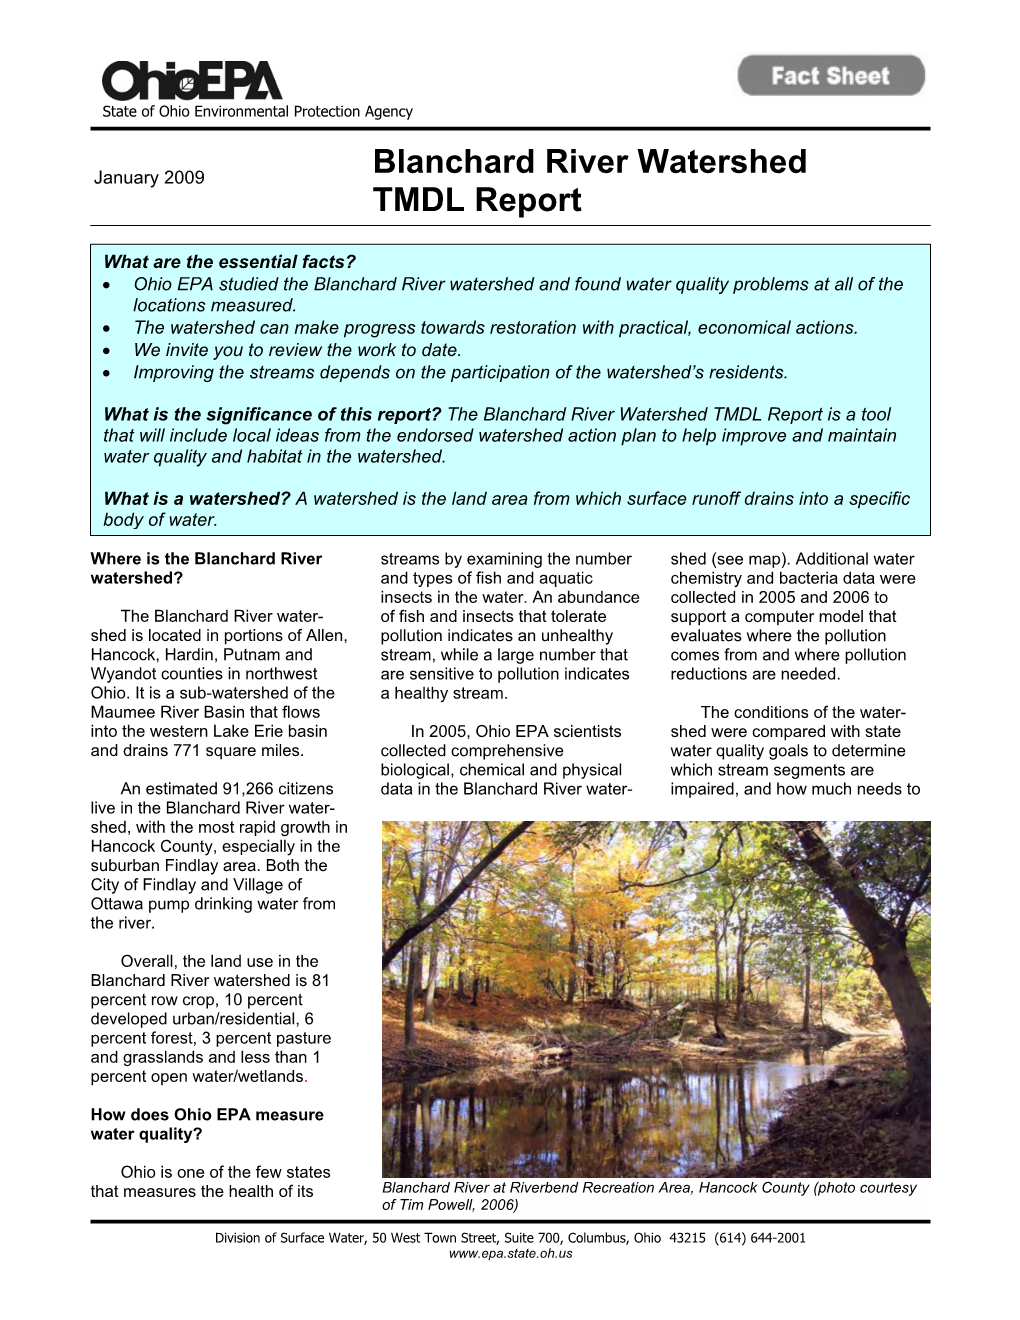 Blanchard River Watershed TMDL Report